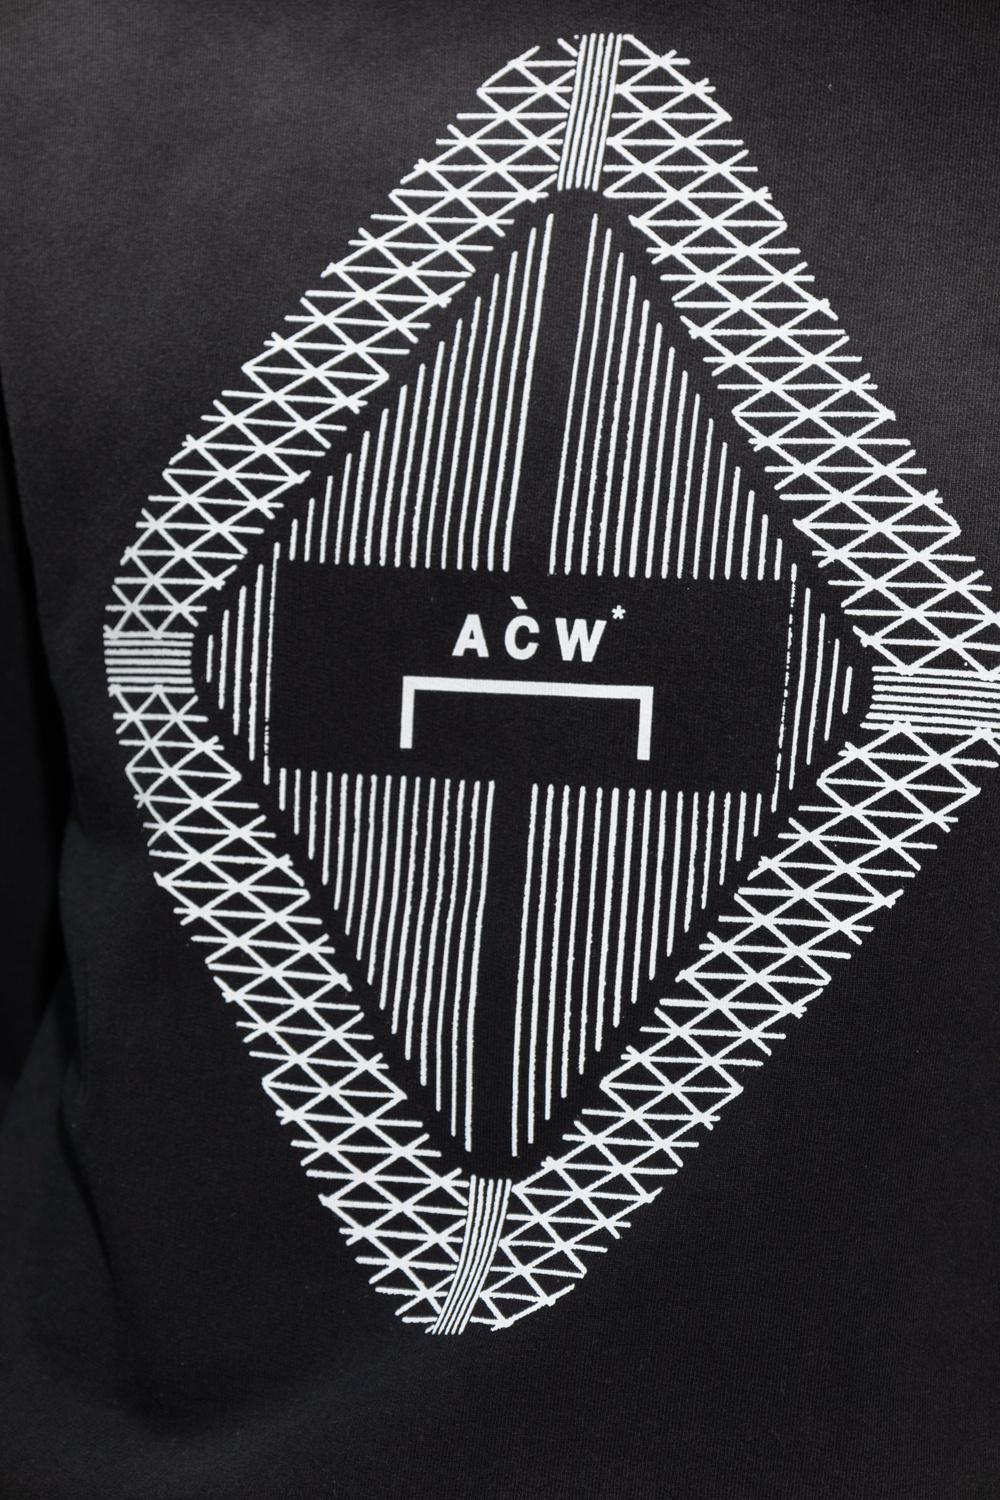 A-COLD-WALL* Printed hoodie